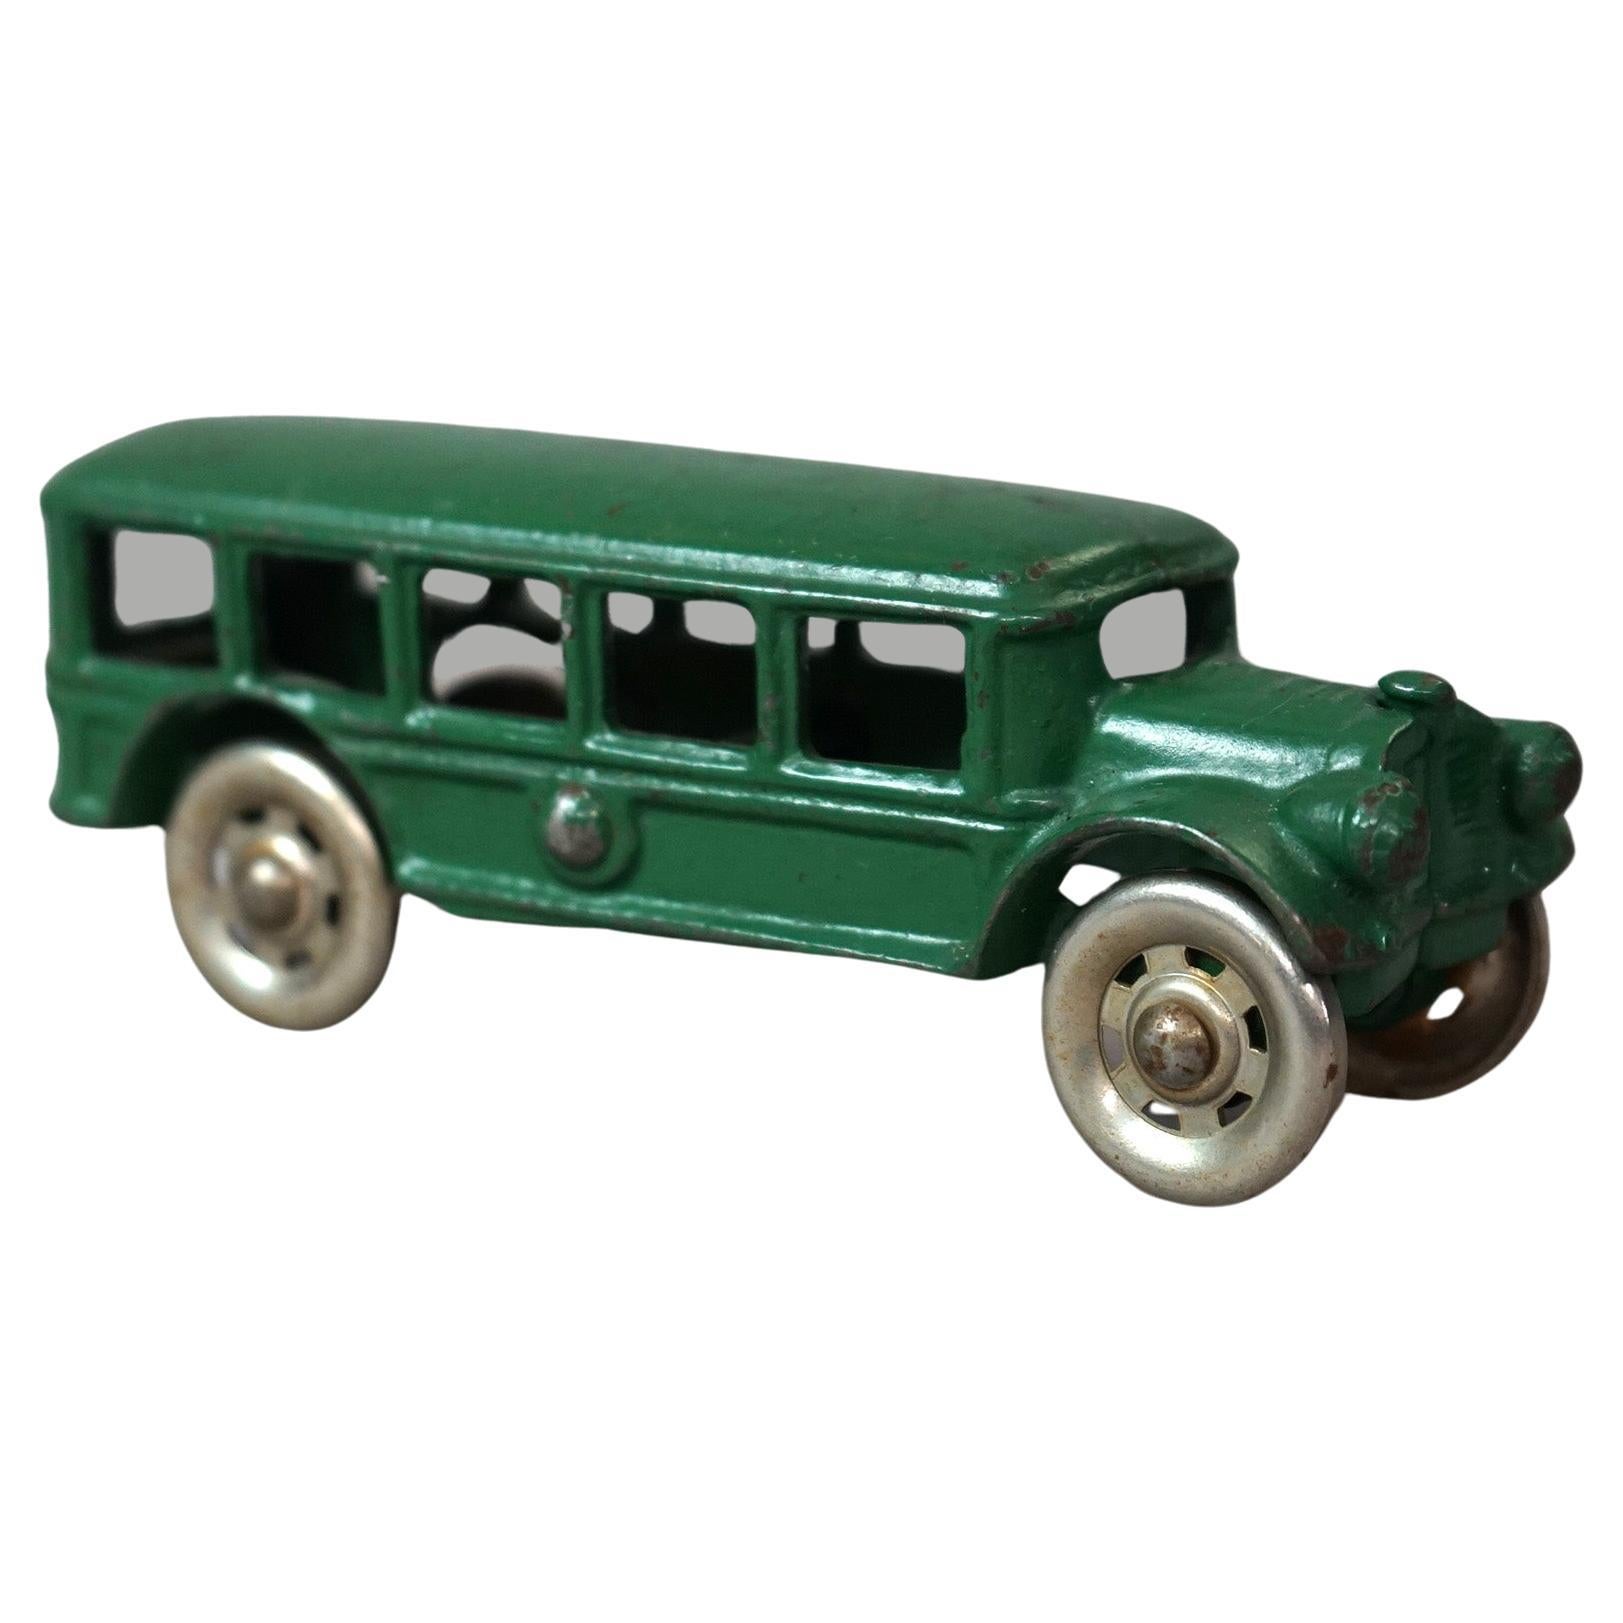 Antique Hurley Green Painted Cast Iron Toy Bus Circa 1930